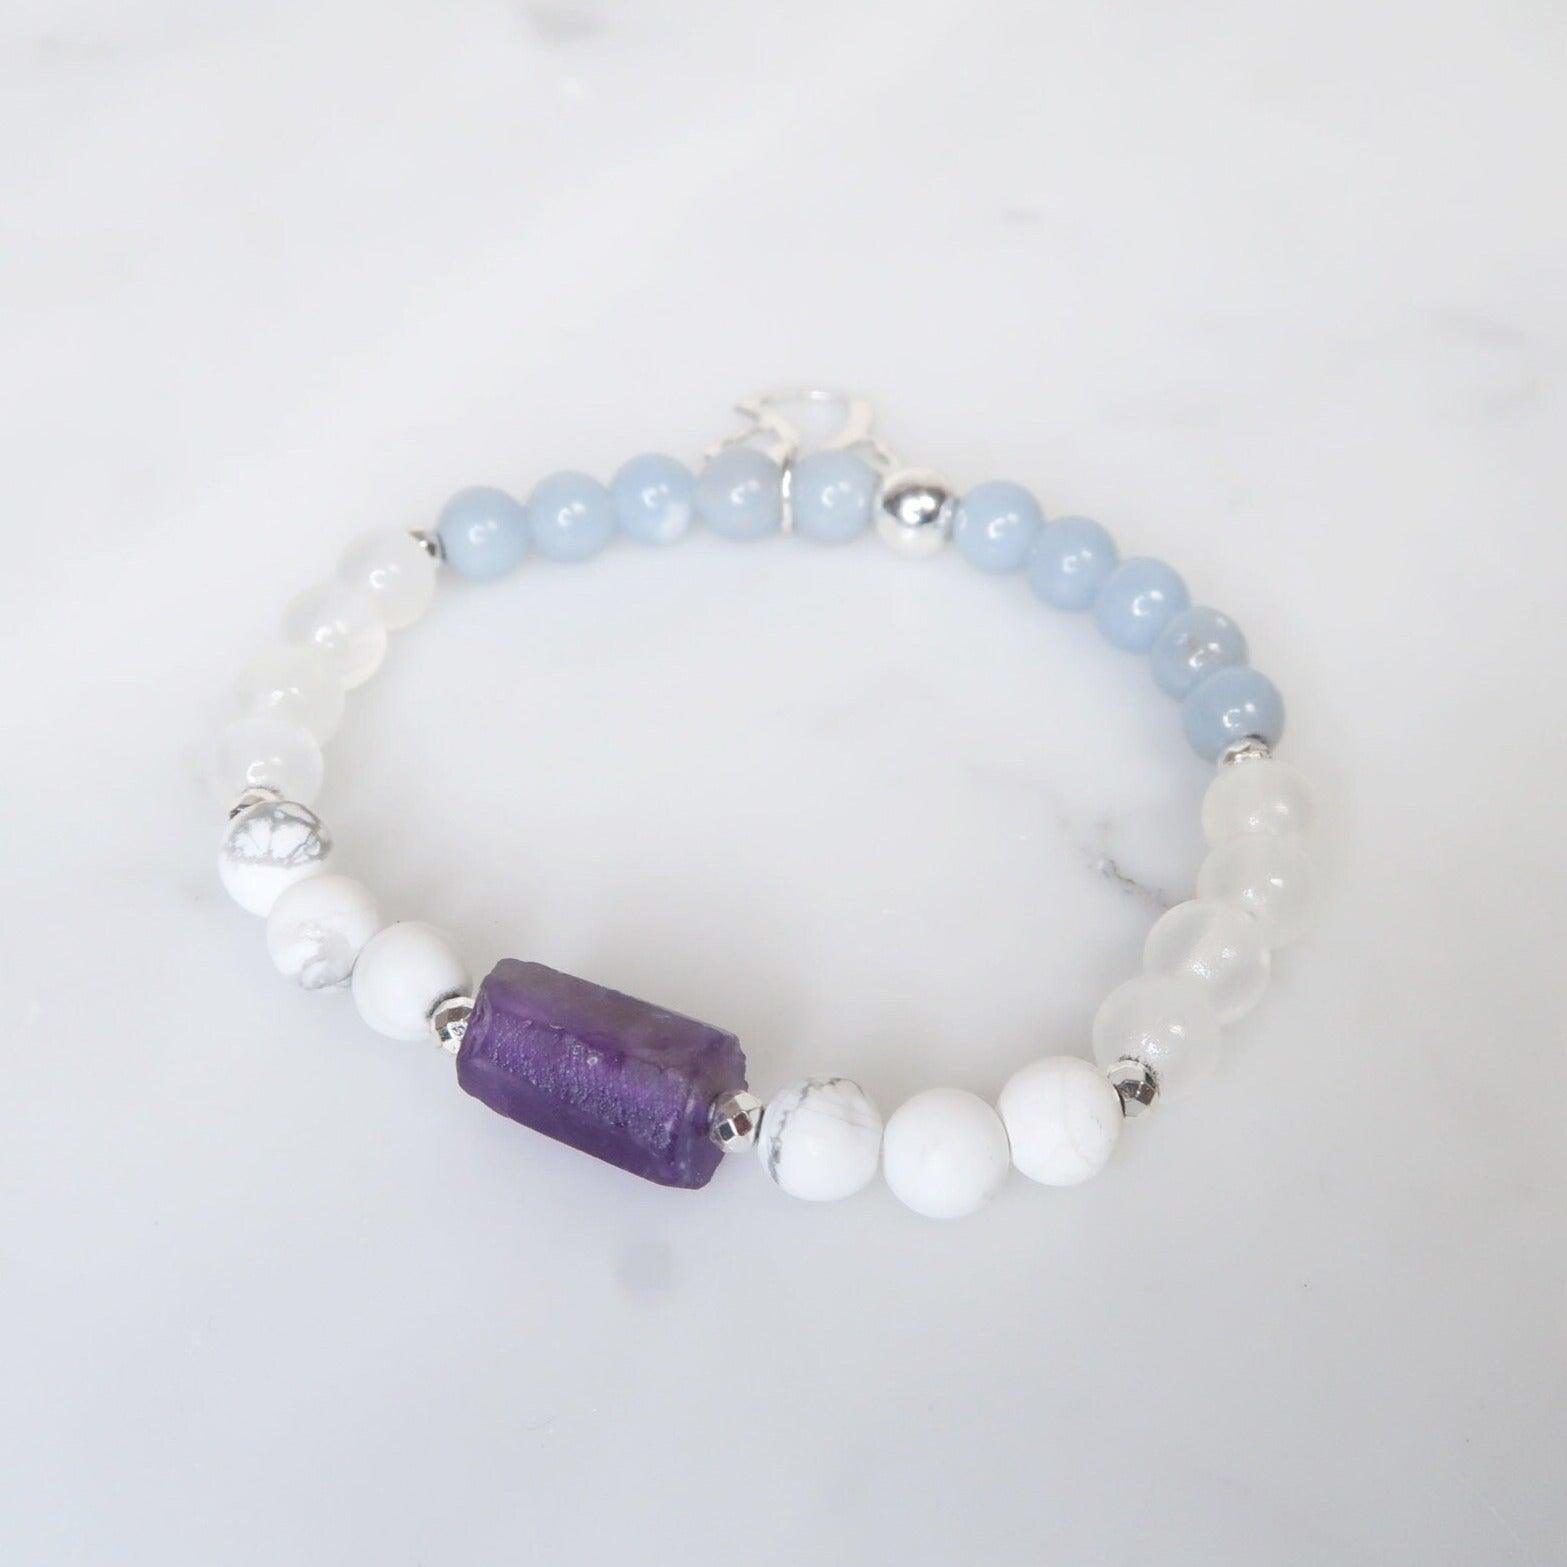 Reiki Infused Healing Gemstone Bracelet to Help you Connect with Your Angels & Guides. Featuring Amethyst, Angelite, Selenite, Howlite and an Angelic Charm to remind you that your team is always by your side. 